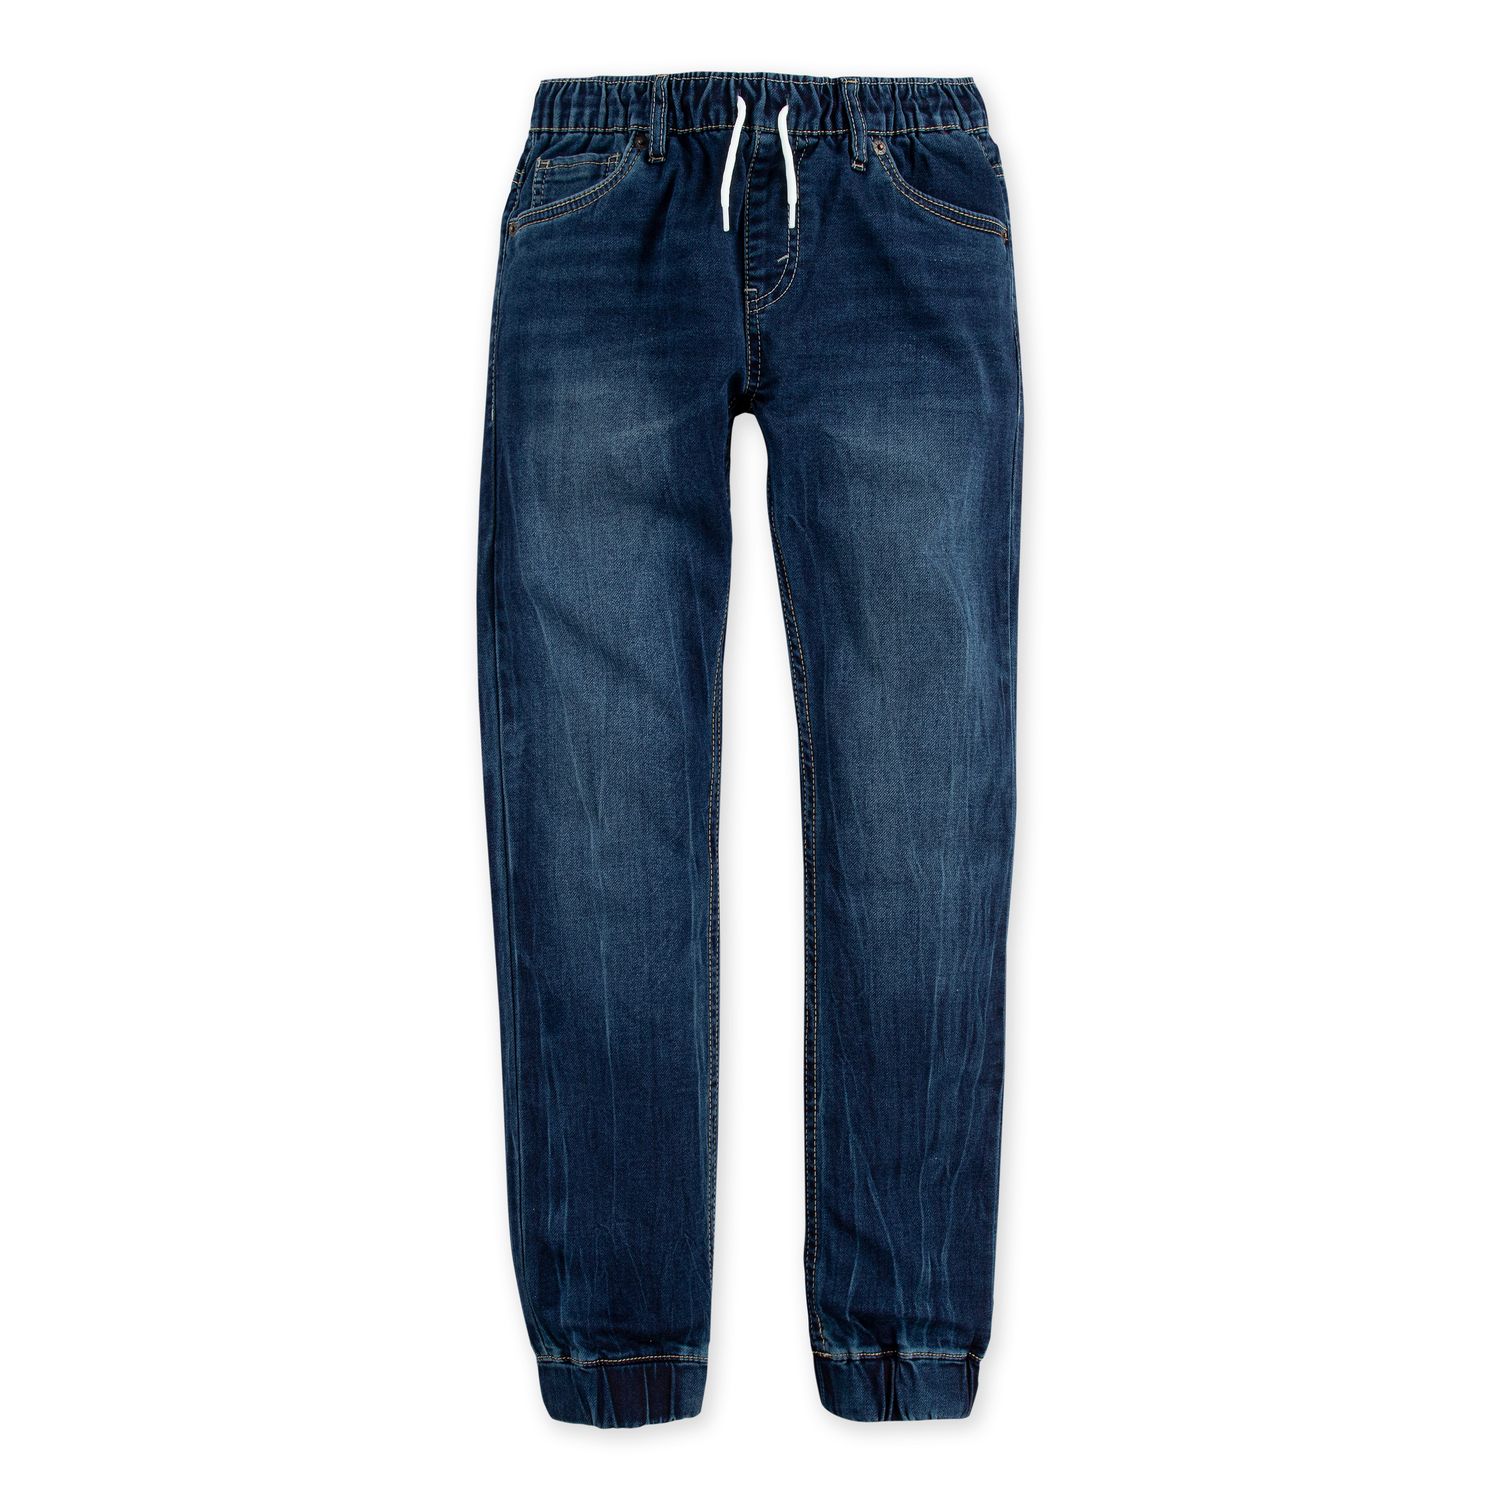 eur 27 in us size jeans